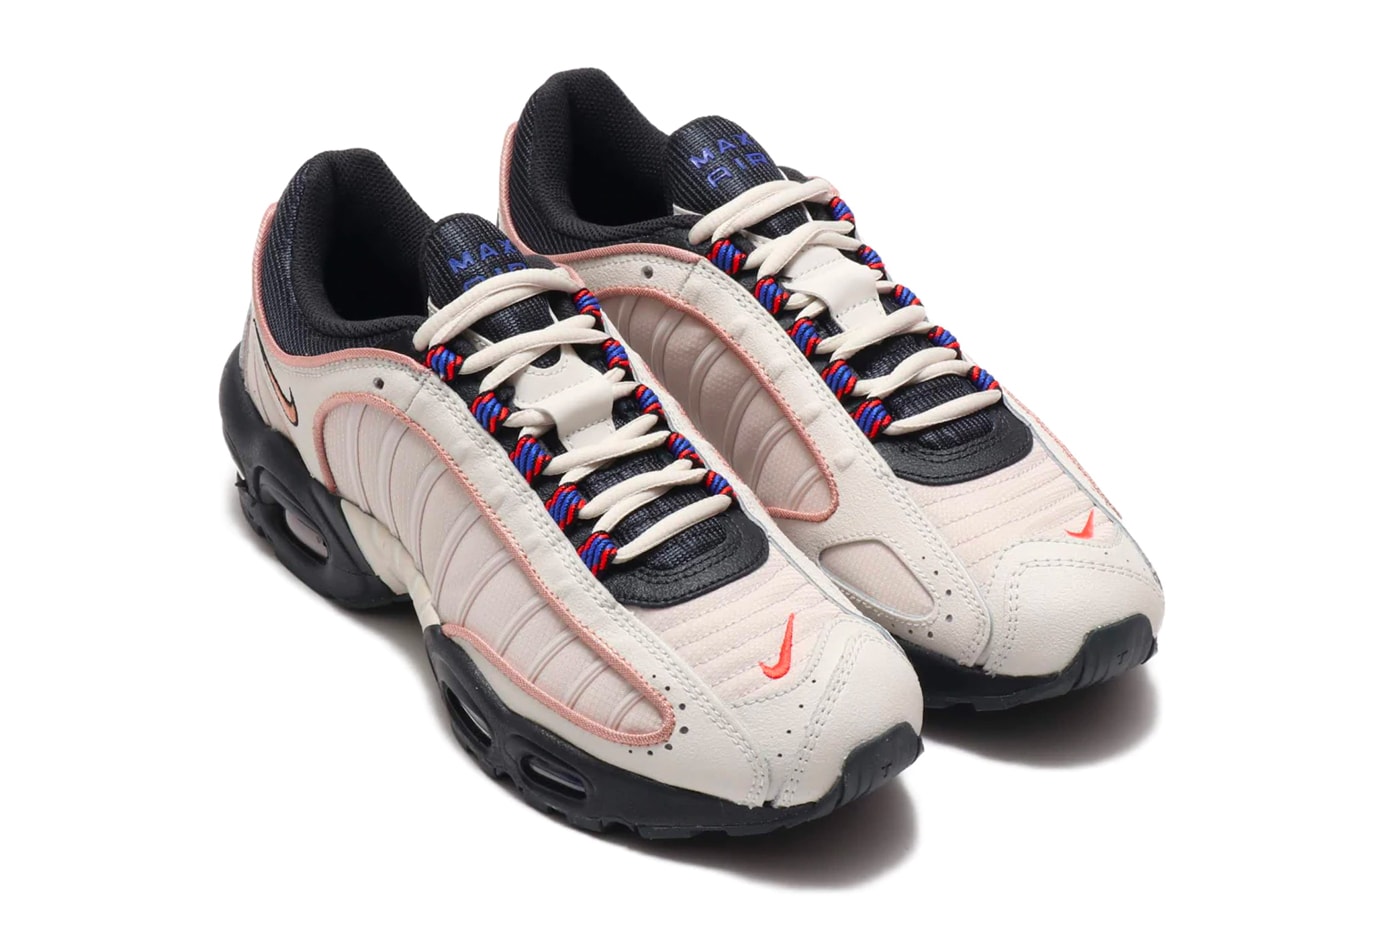 Nike Air Max Tailwind IV SE  Phantom Desert Sand MTLC RED BRONZE fall winter holiday 2019 cj9681 001 navy red sneakers footwear shoes trainers runners 1990 retro swoosh